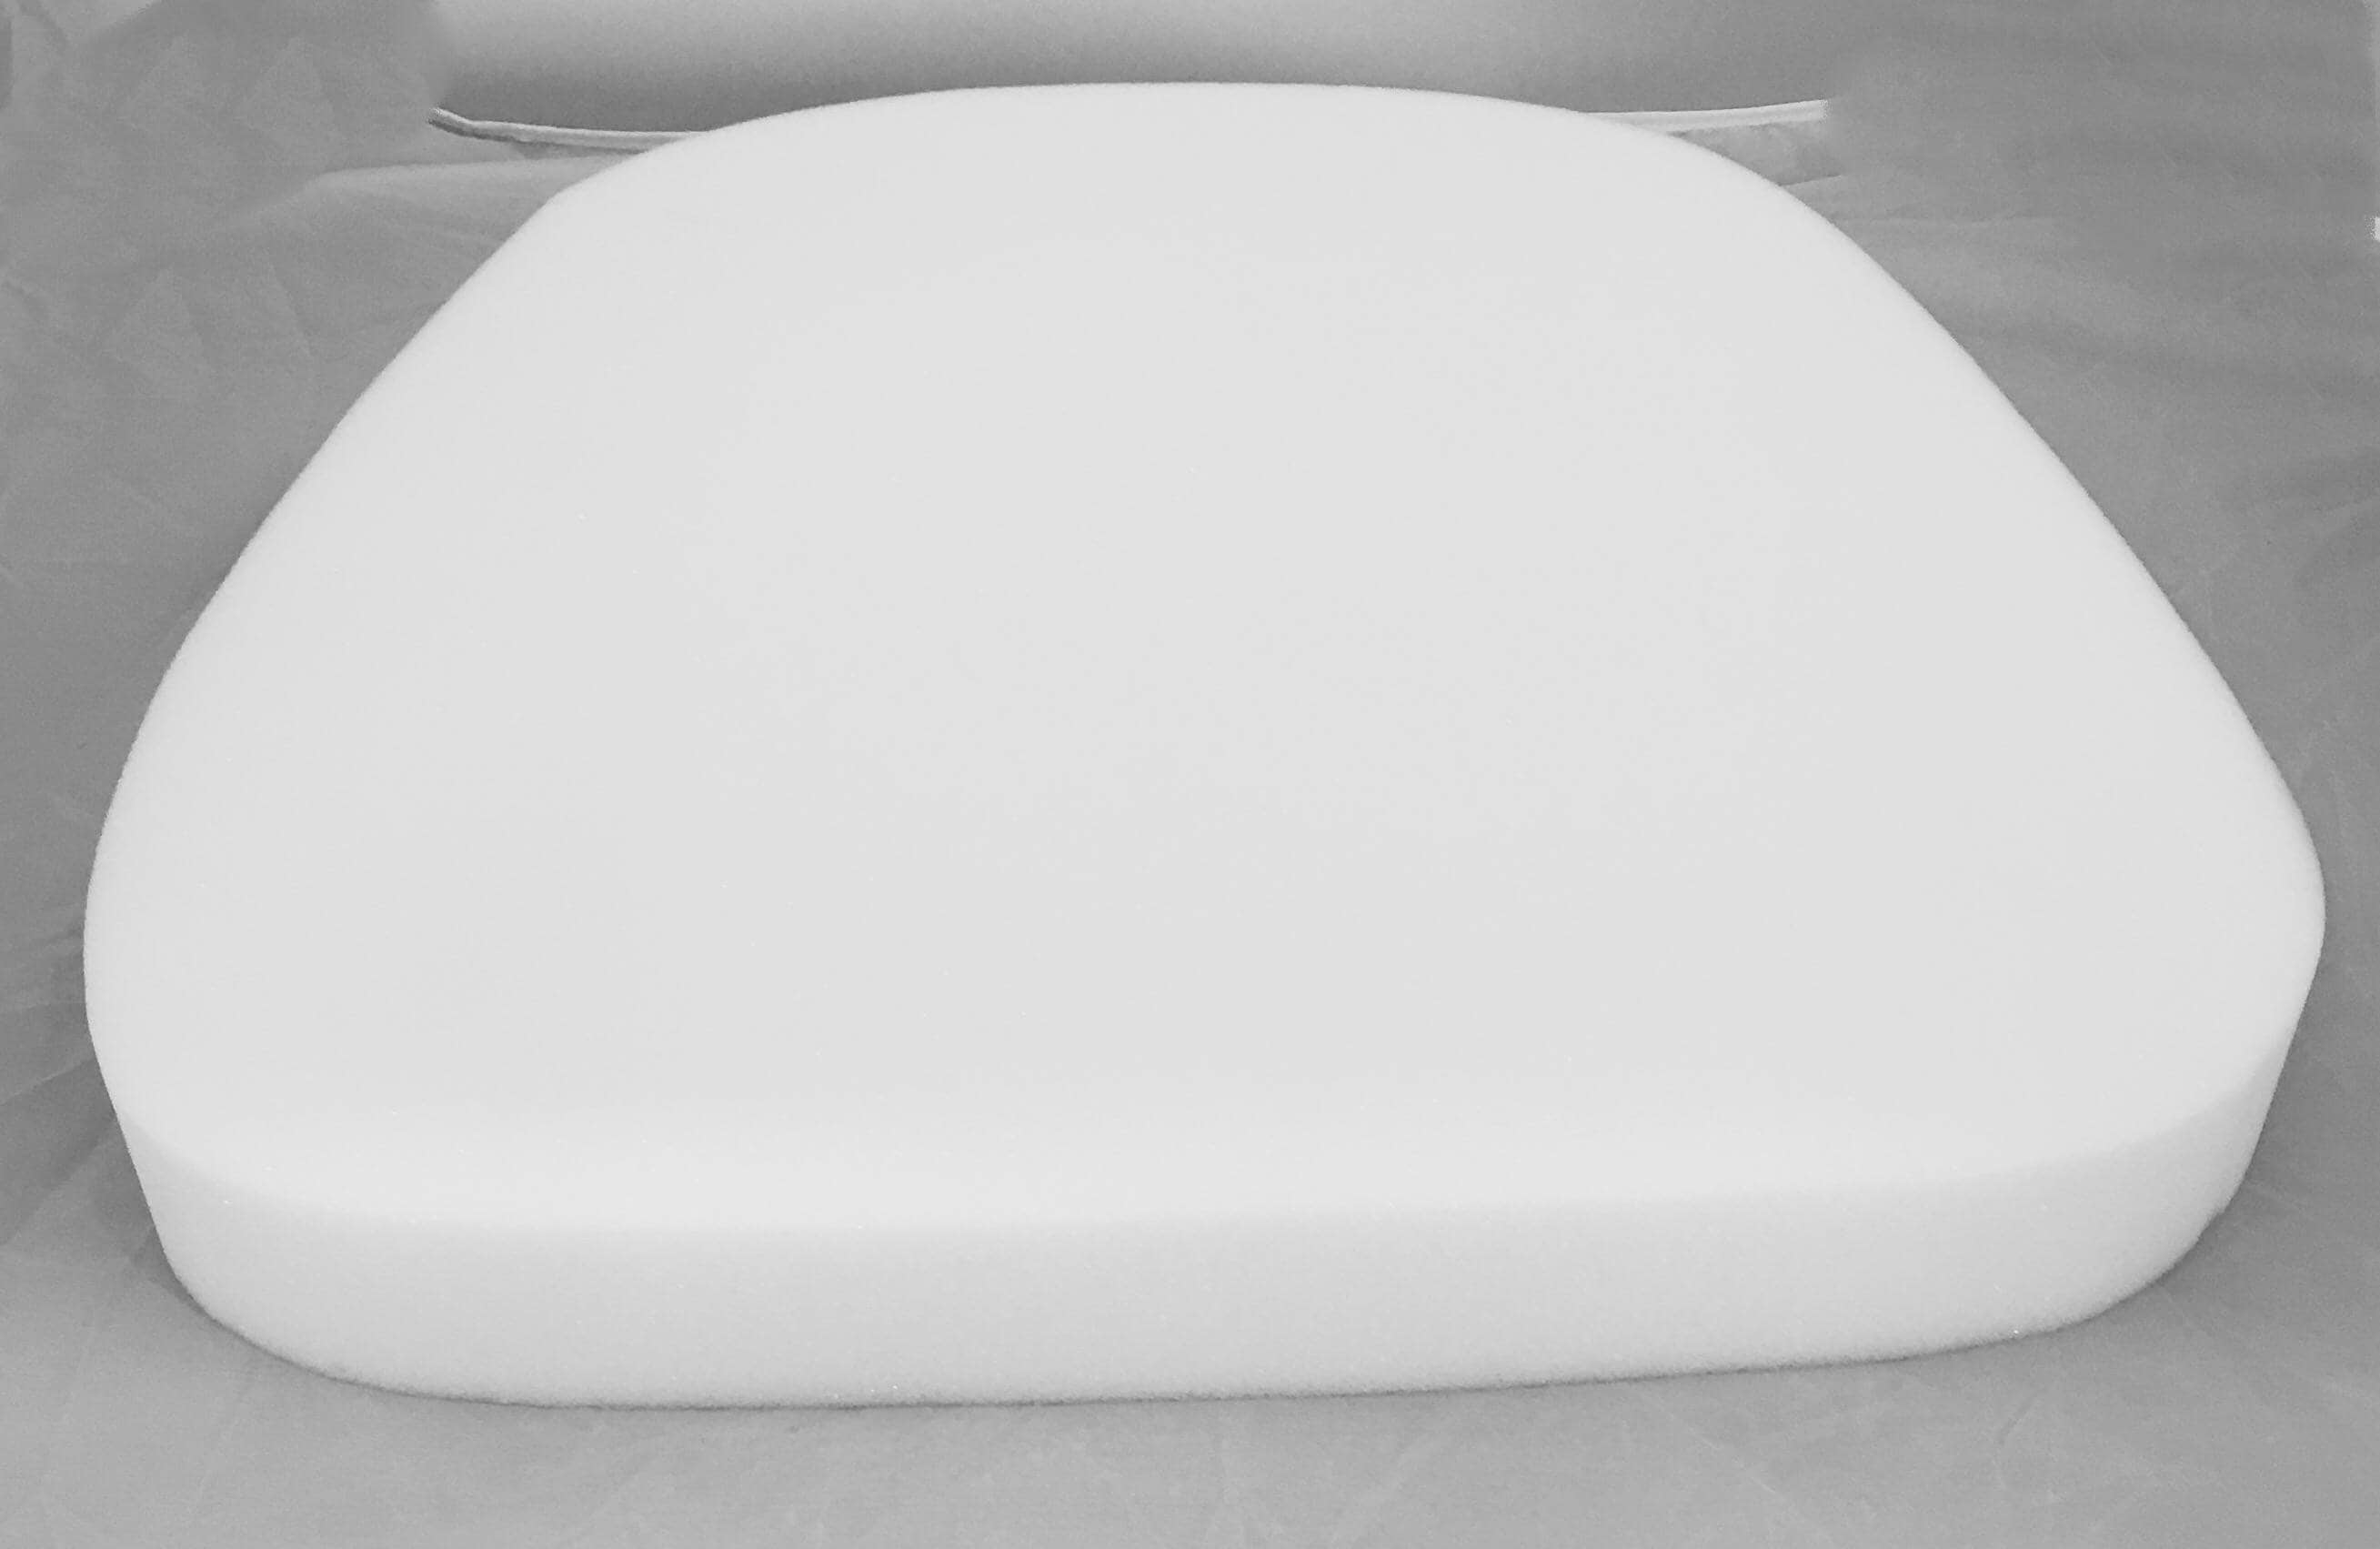 Upholstery Chair Foam Cushion Approximately 2 Thick 16x 16 